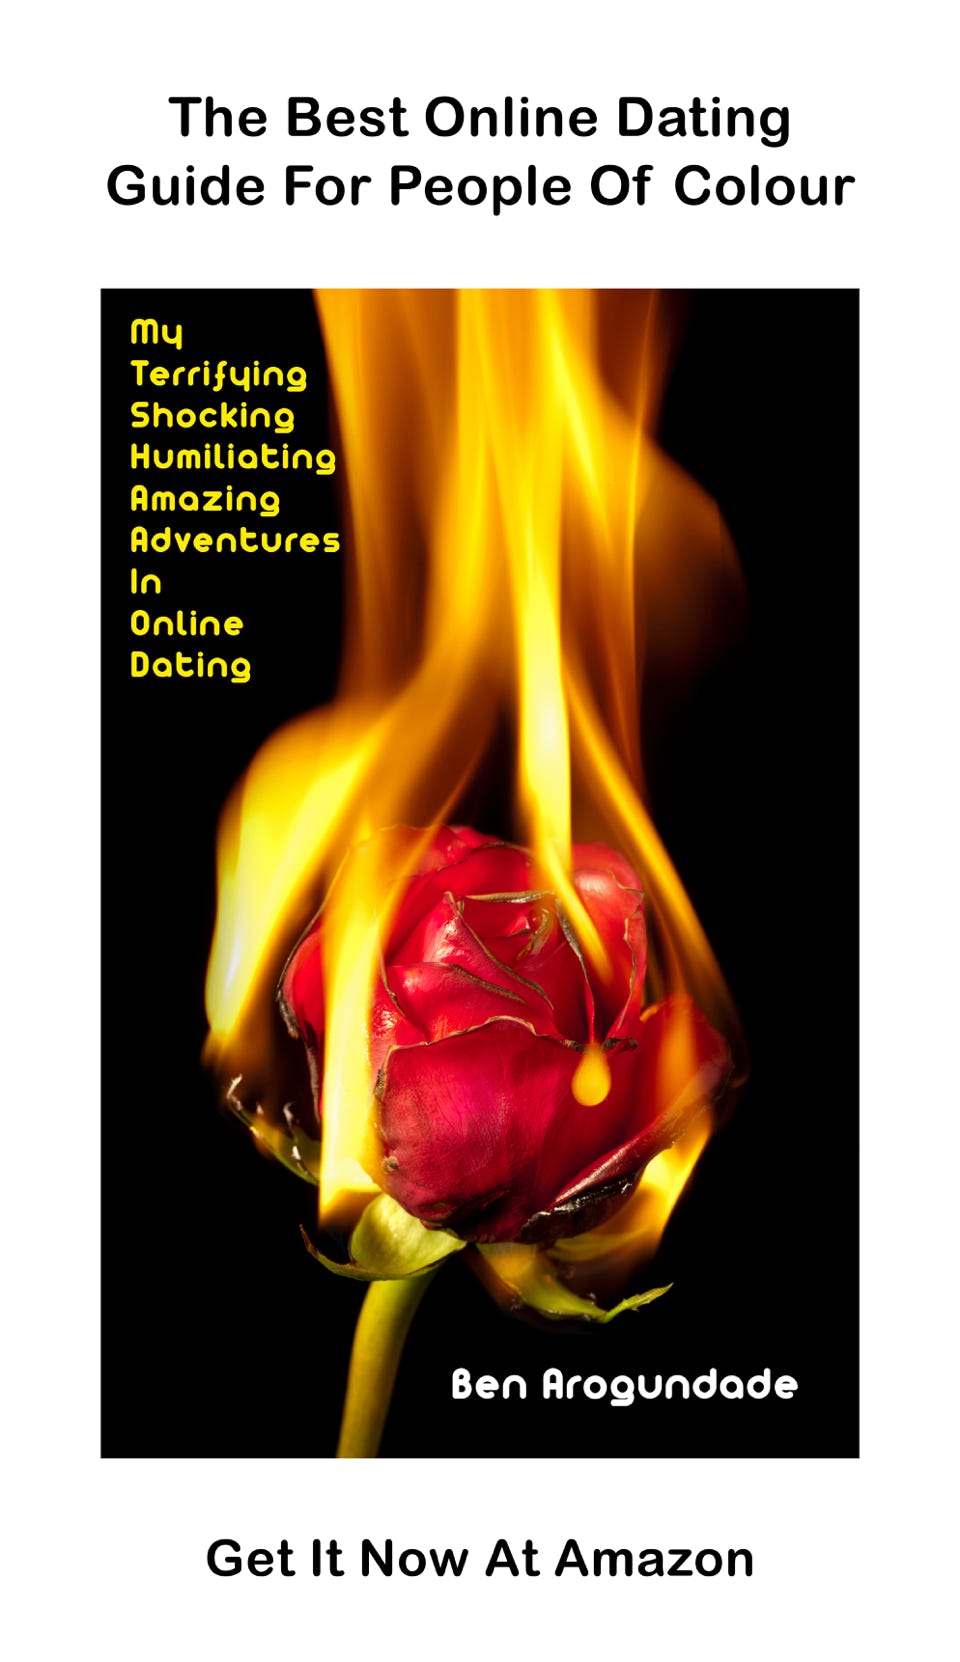 bestselling new online dating book 2021